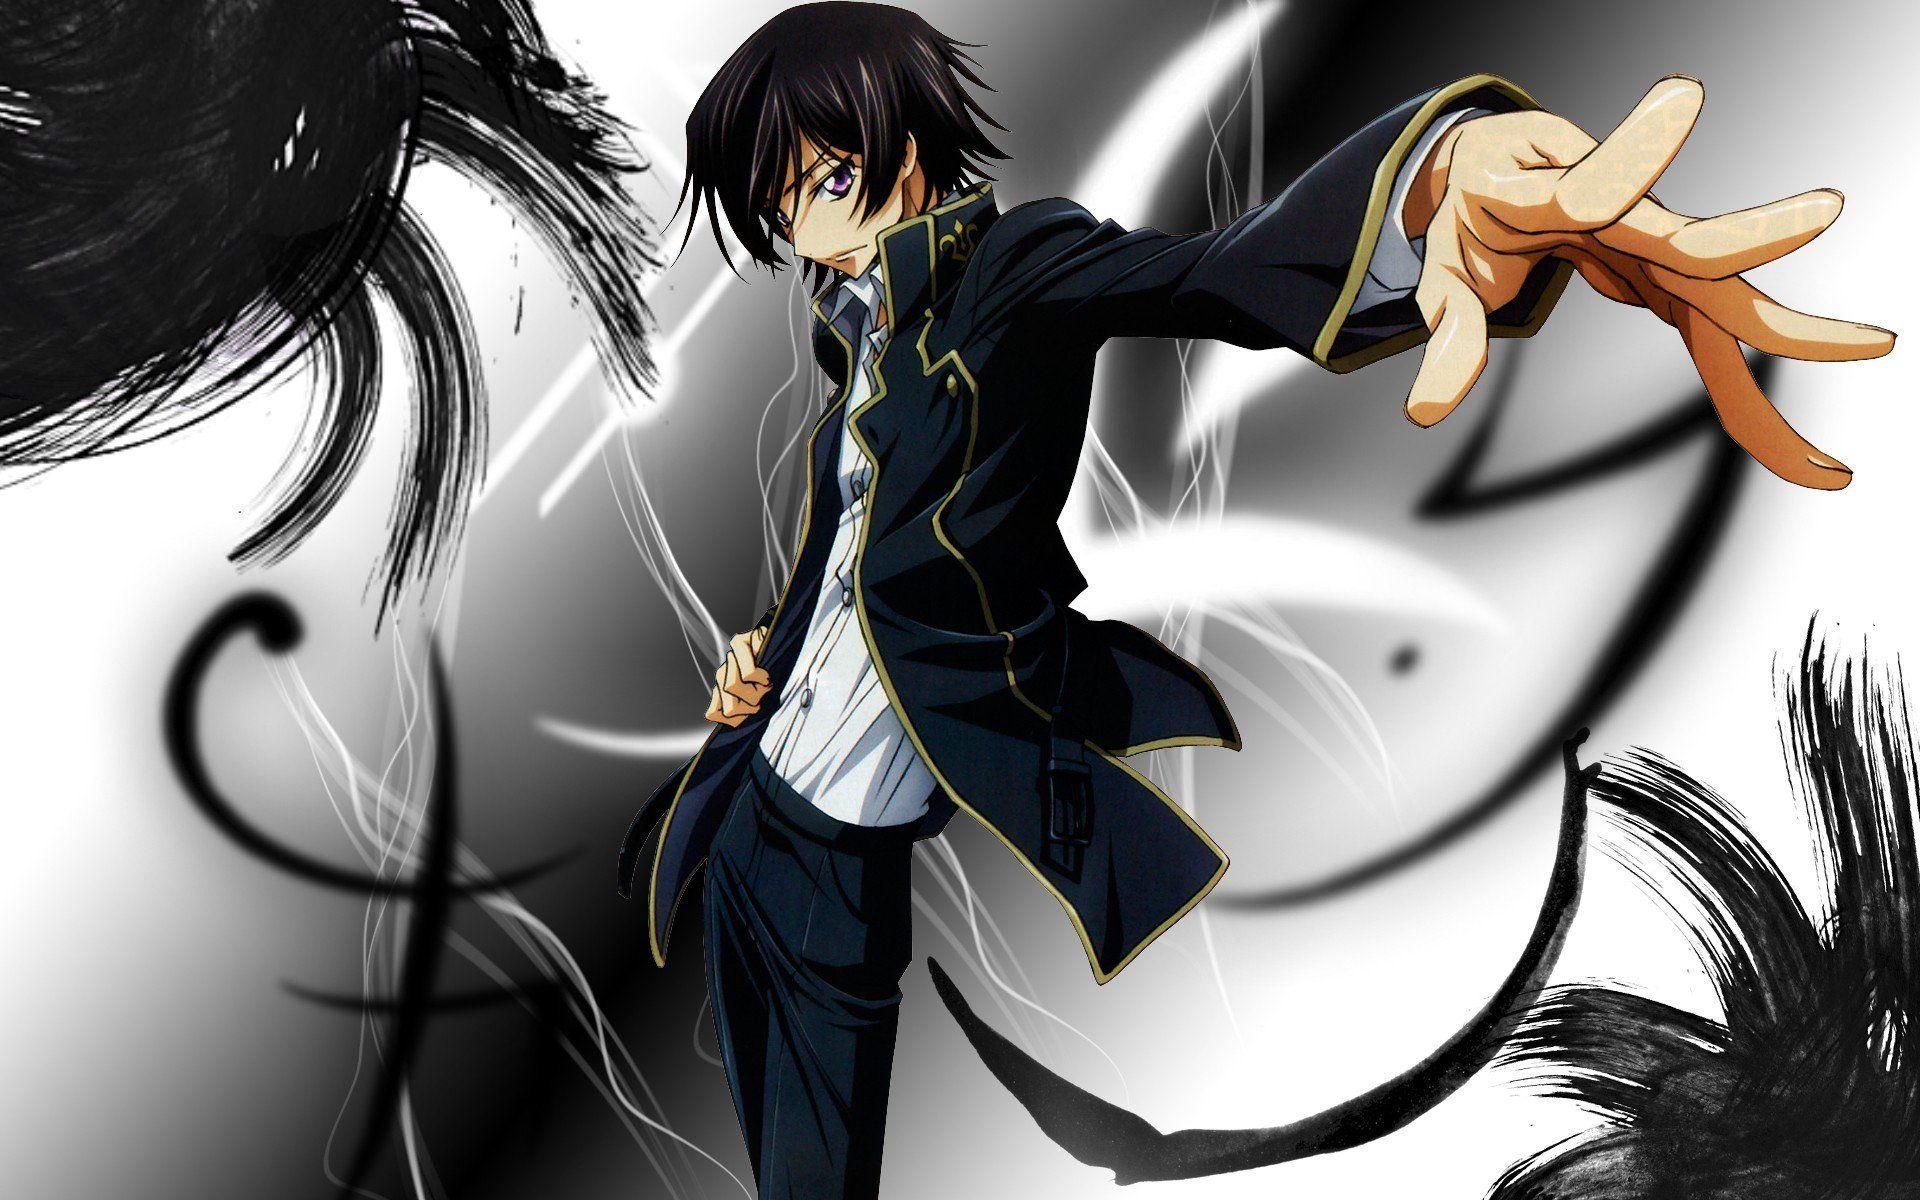 Mobile wallpaper: Anime, Lelouch Lamperouge, Code Geass, 710416 download  the picture for free.